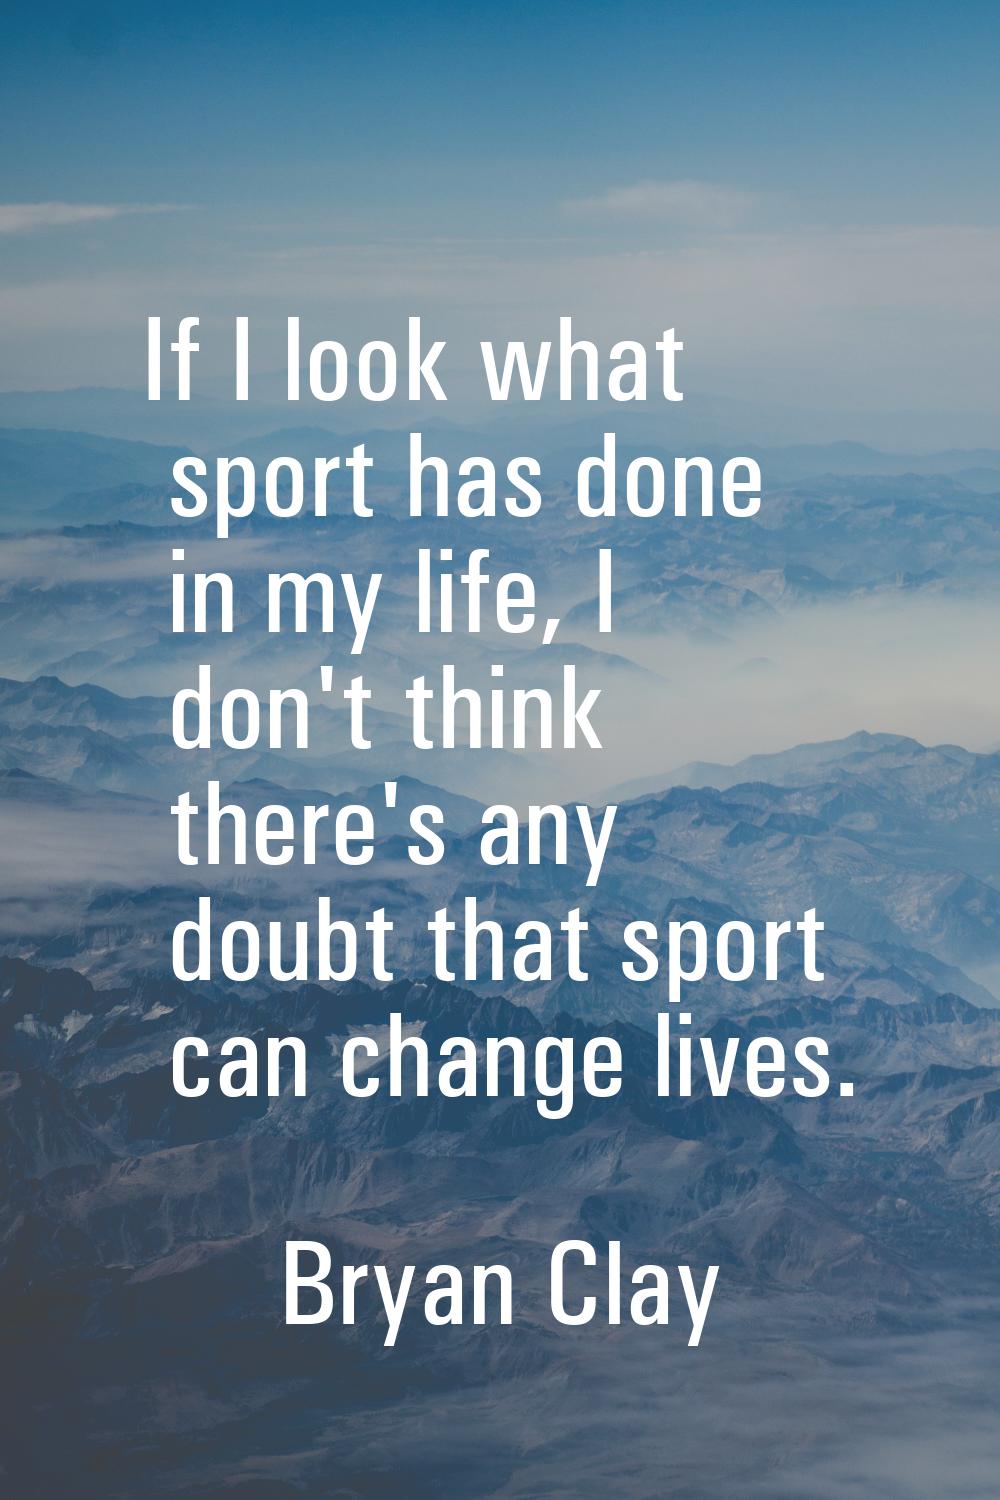 If I look what sport has done in my life, I don't think there's any doubt that sport can change liv